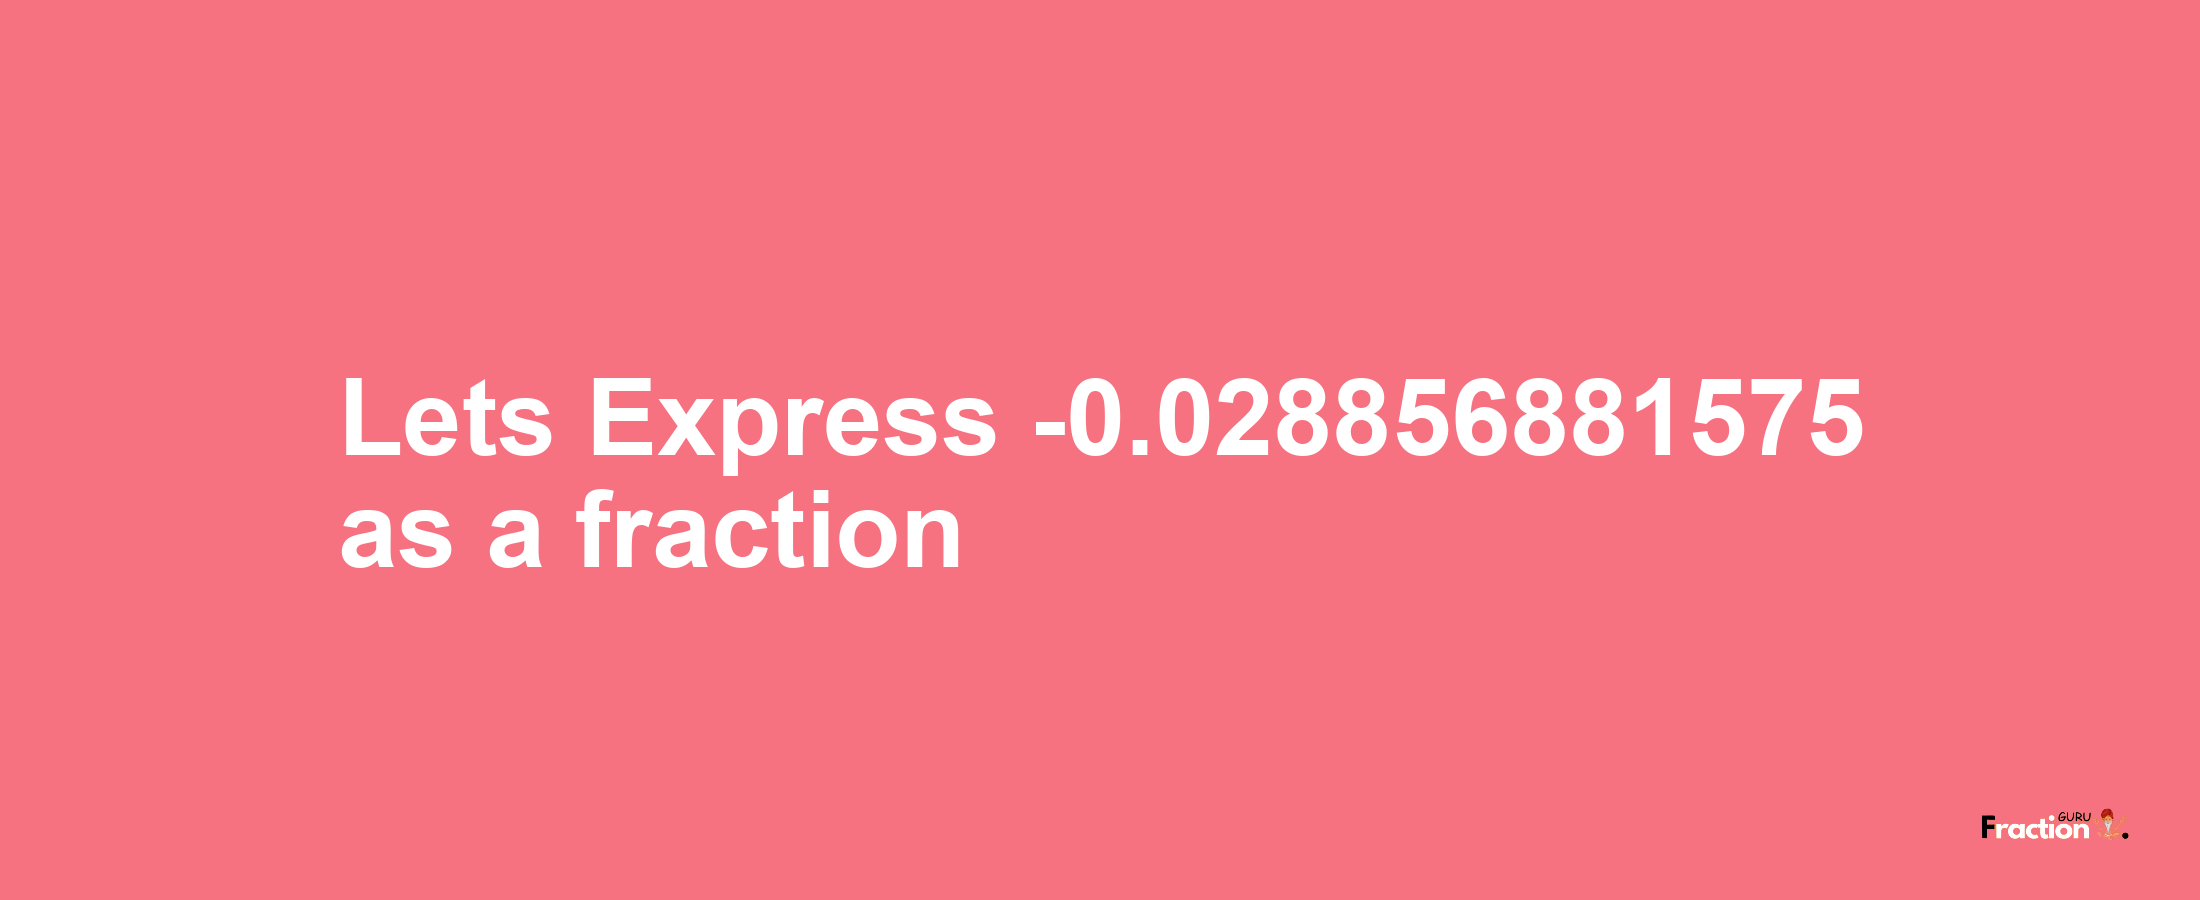 Lets Express -0.028856881575 as afraction